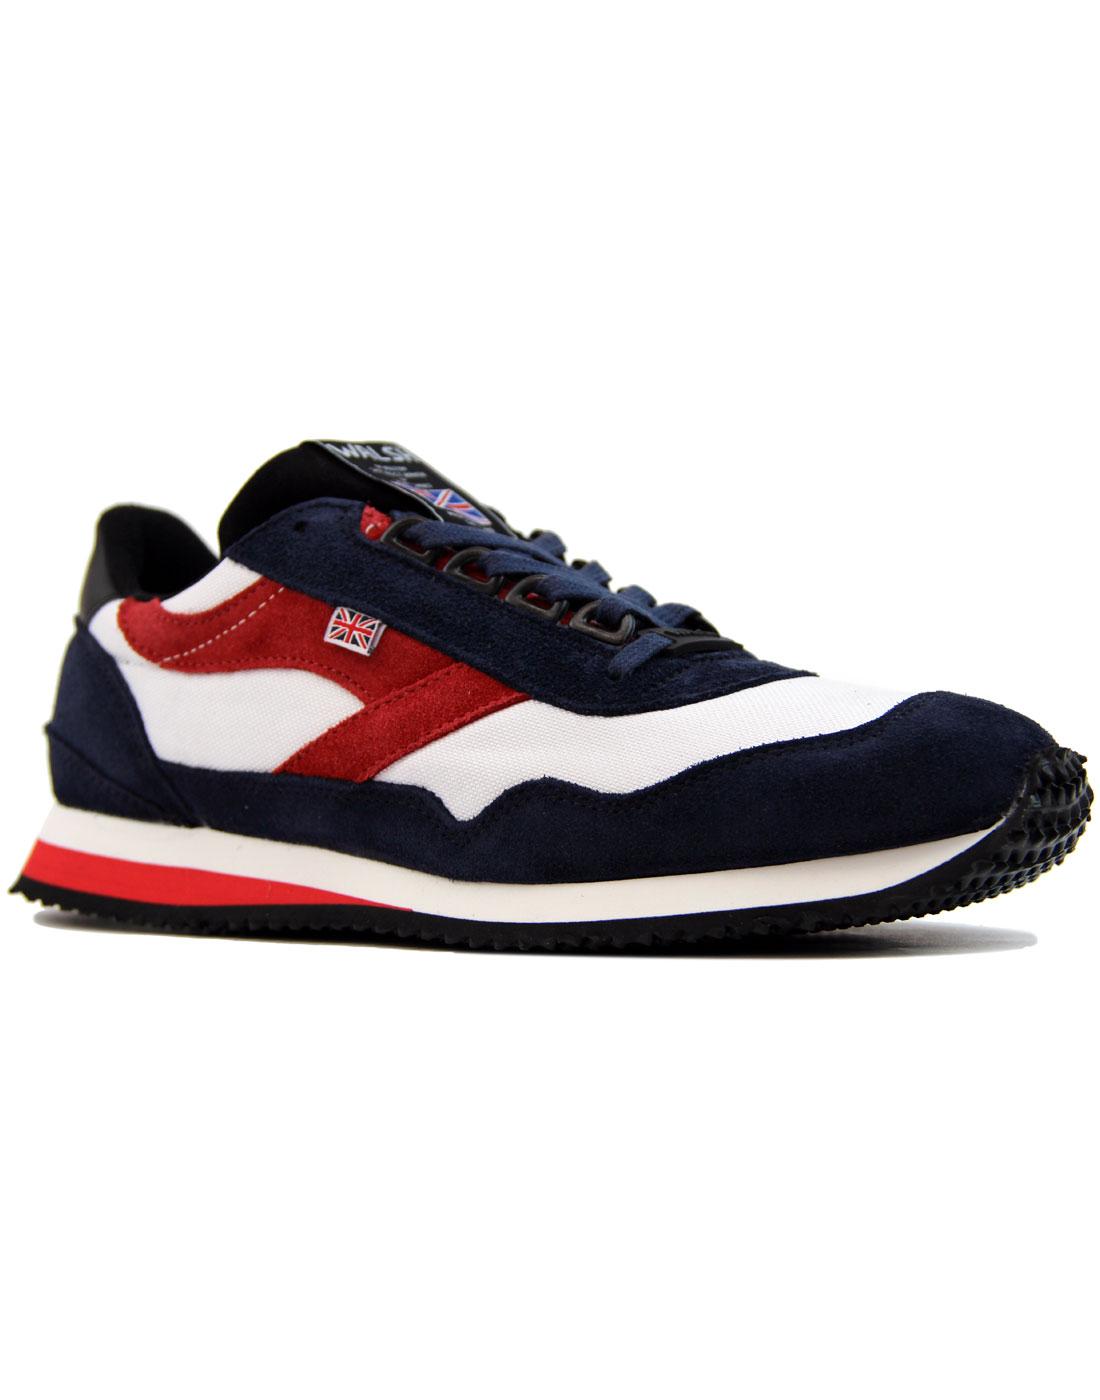 Ensign New York WALSH Made in England Trainers